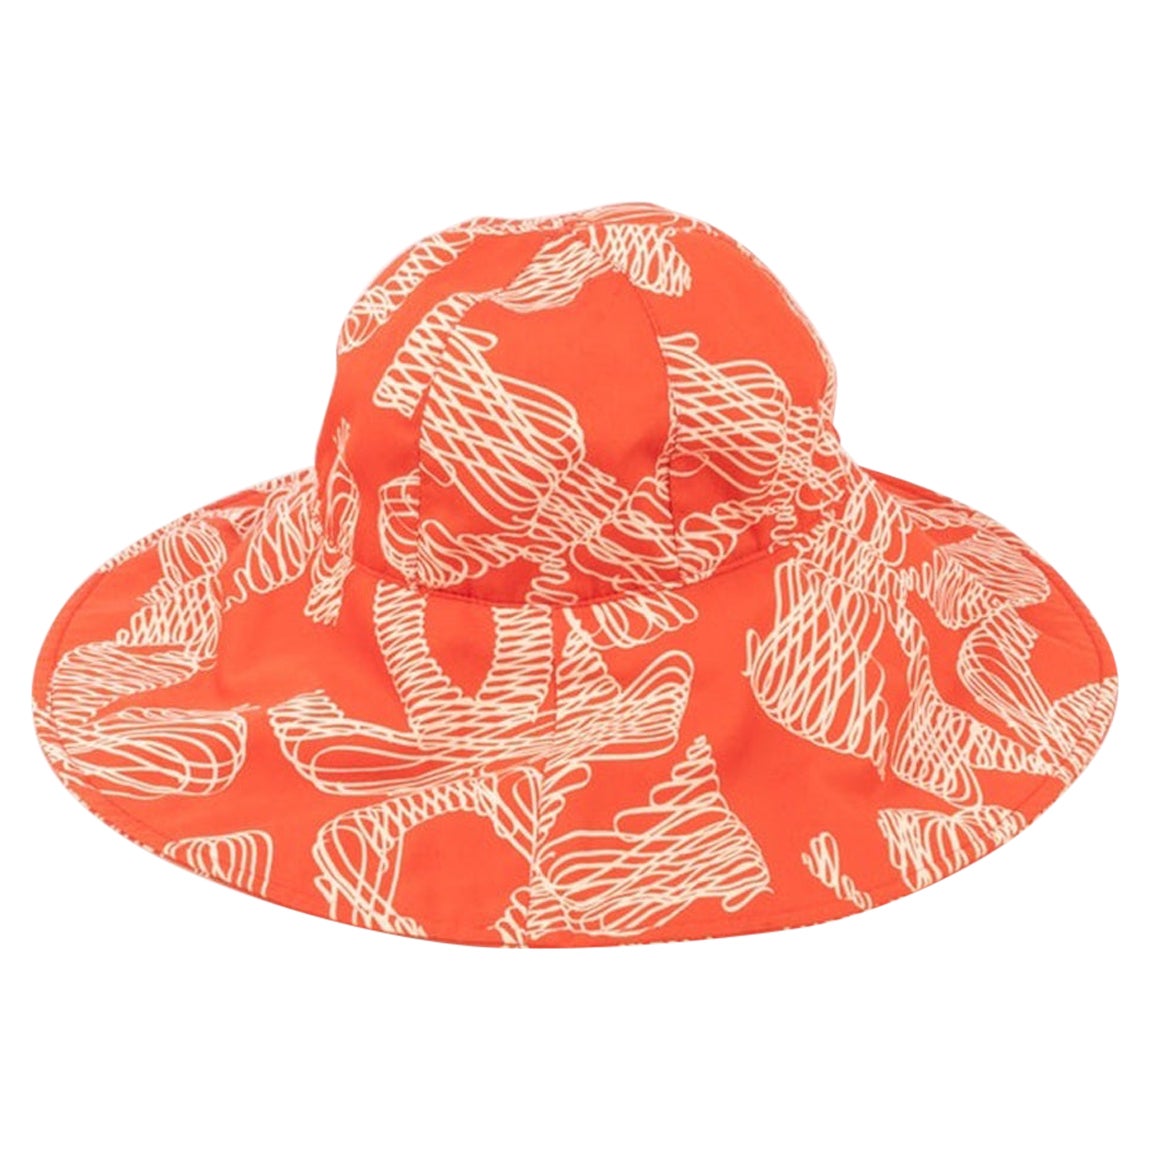 Chanel Orange and White Cotton Hat For Sale